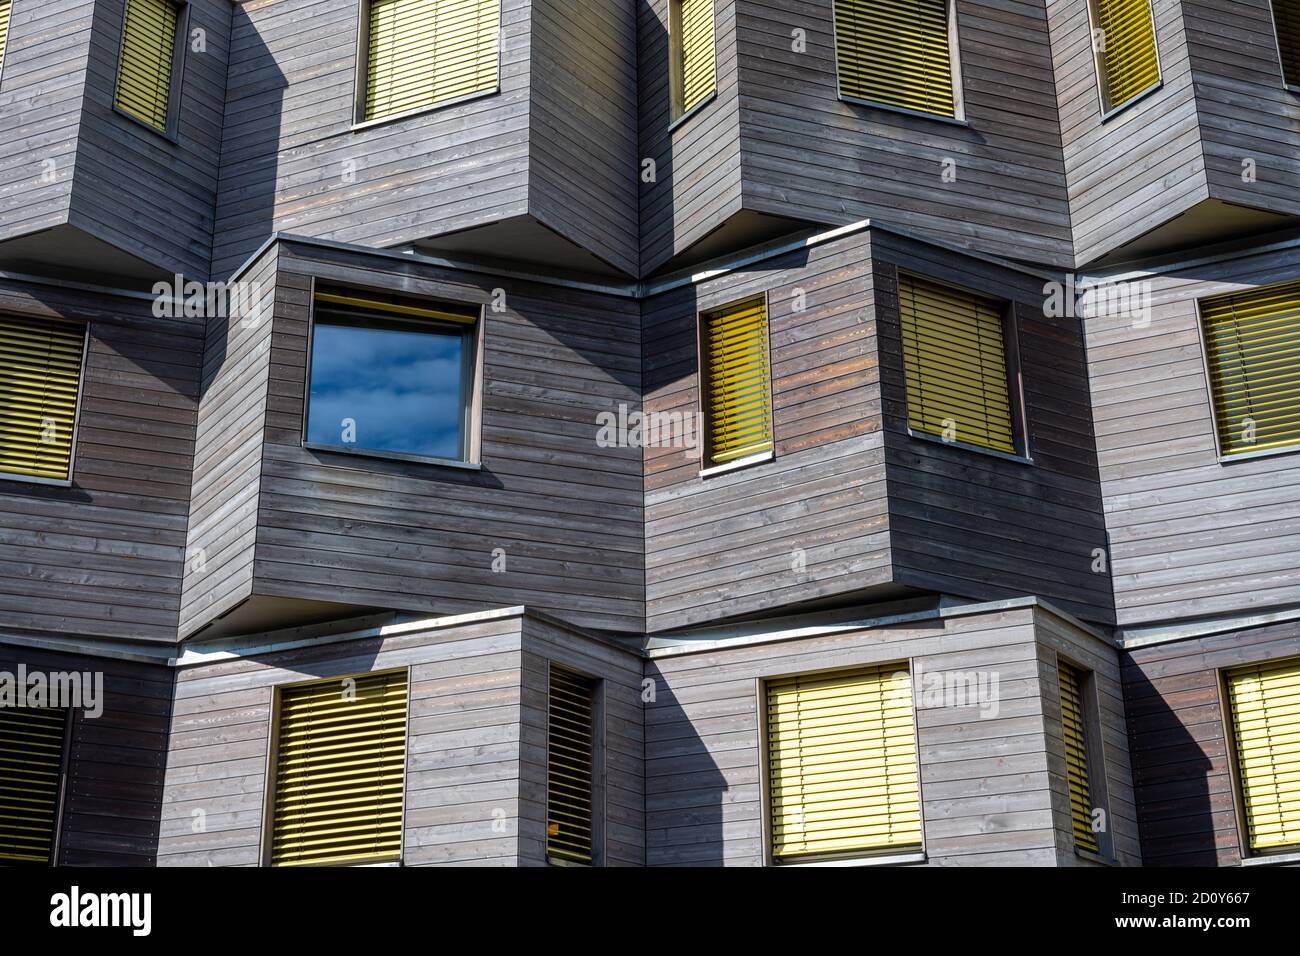 Detail of a wooden facade of a modern apartment building Stock Photo